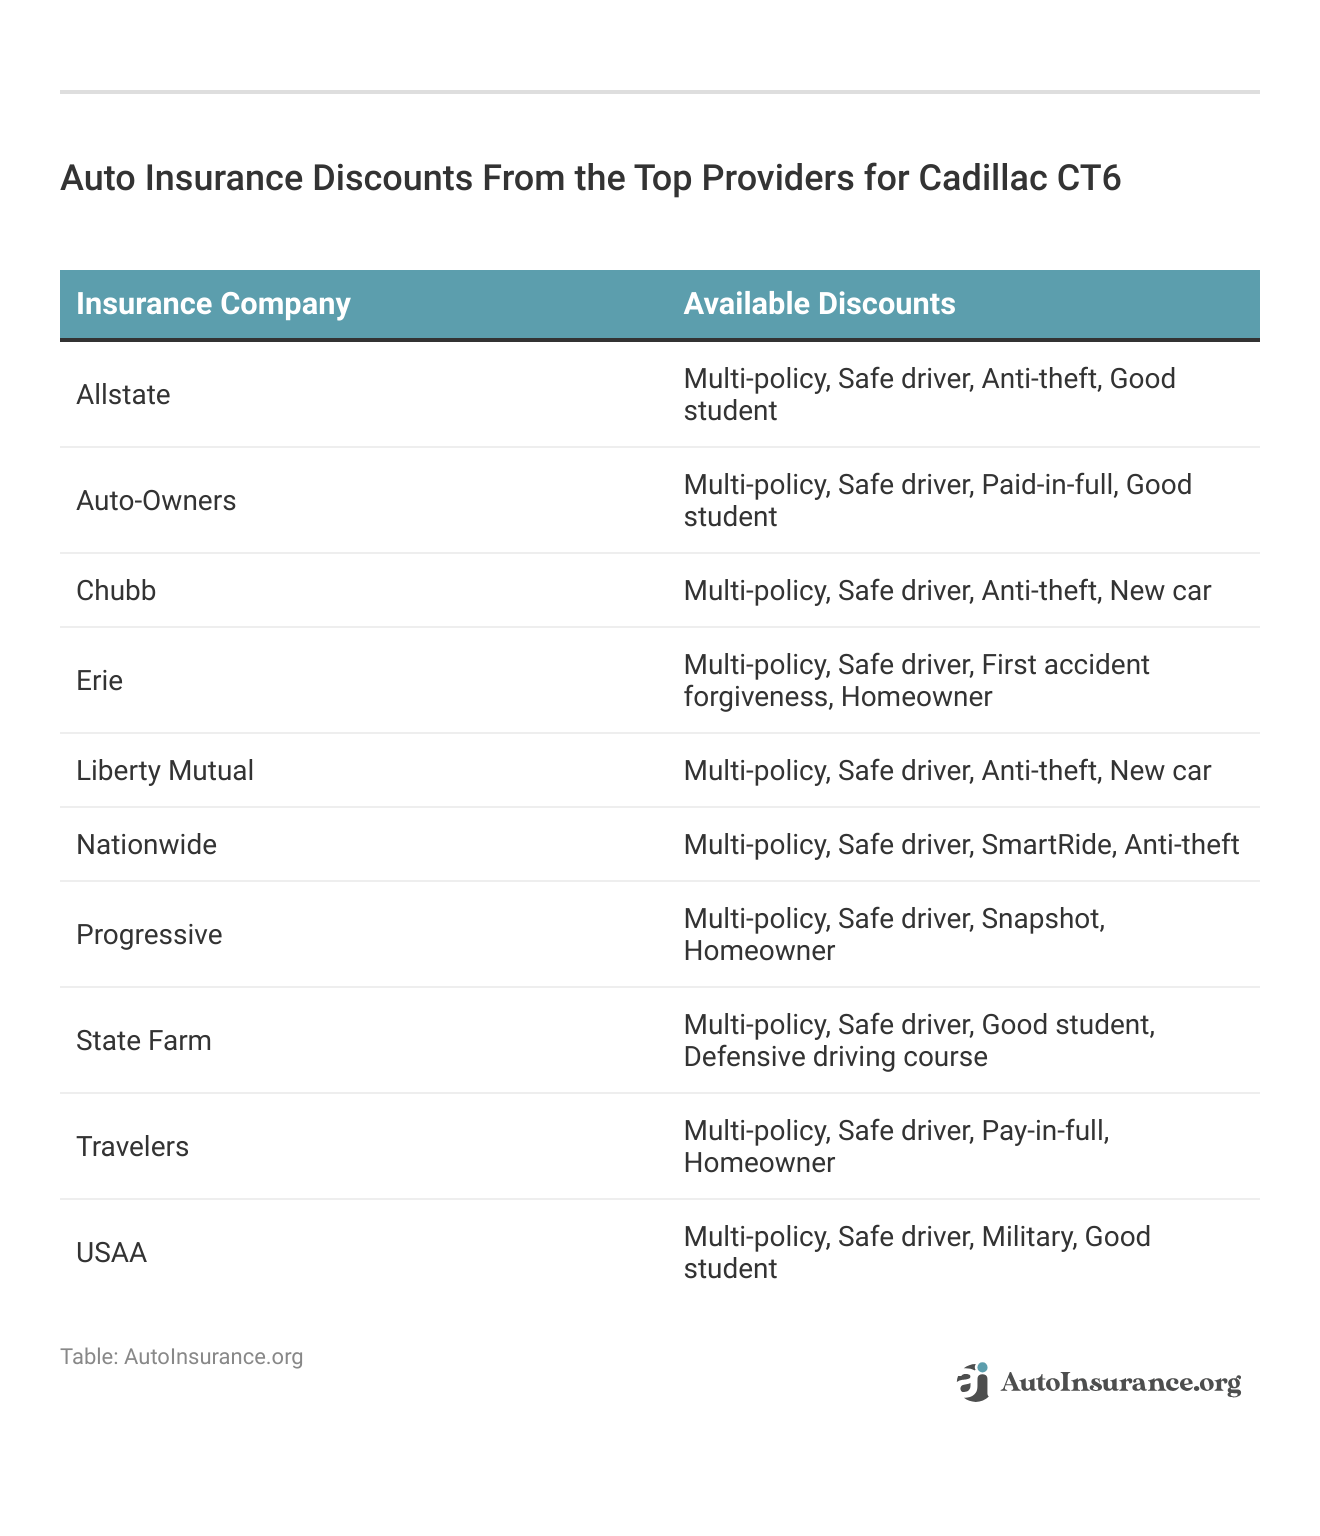 <h3>Auto Insurance Discounts From the Top Providers for Cadillac CT6</h3>